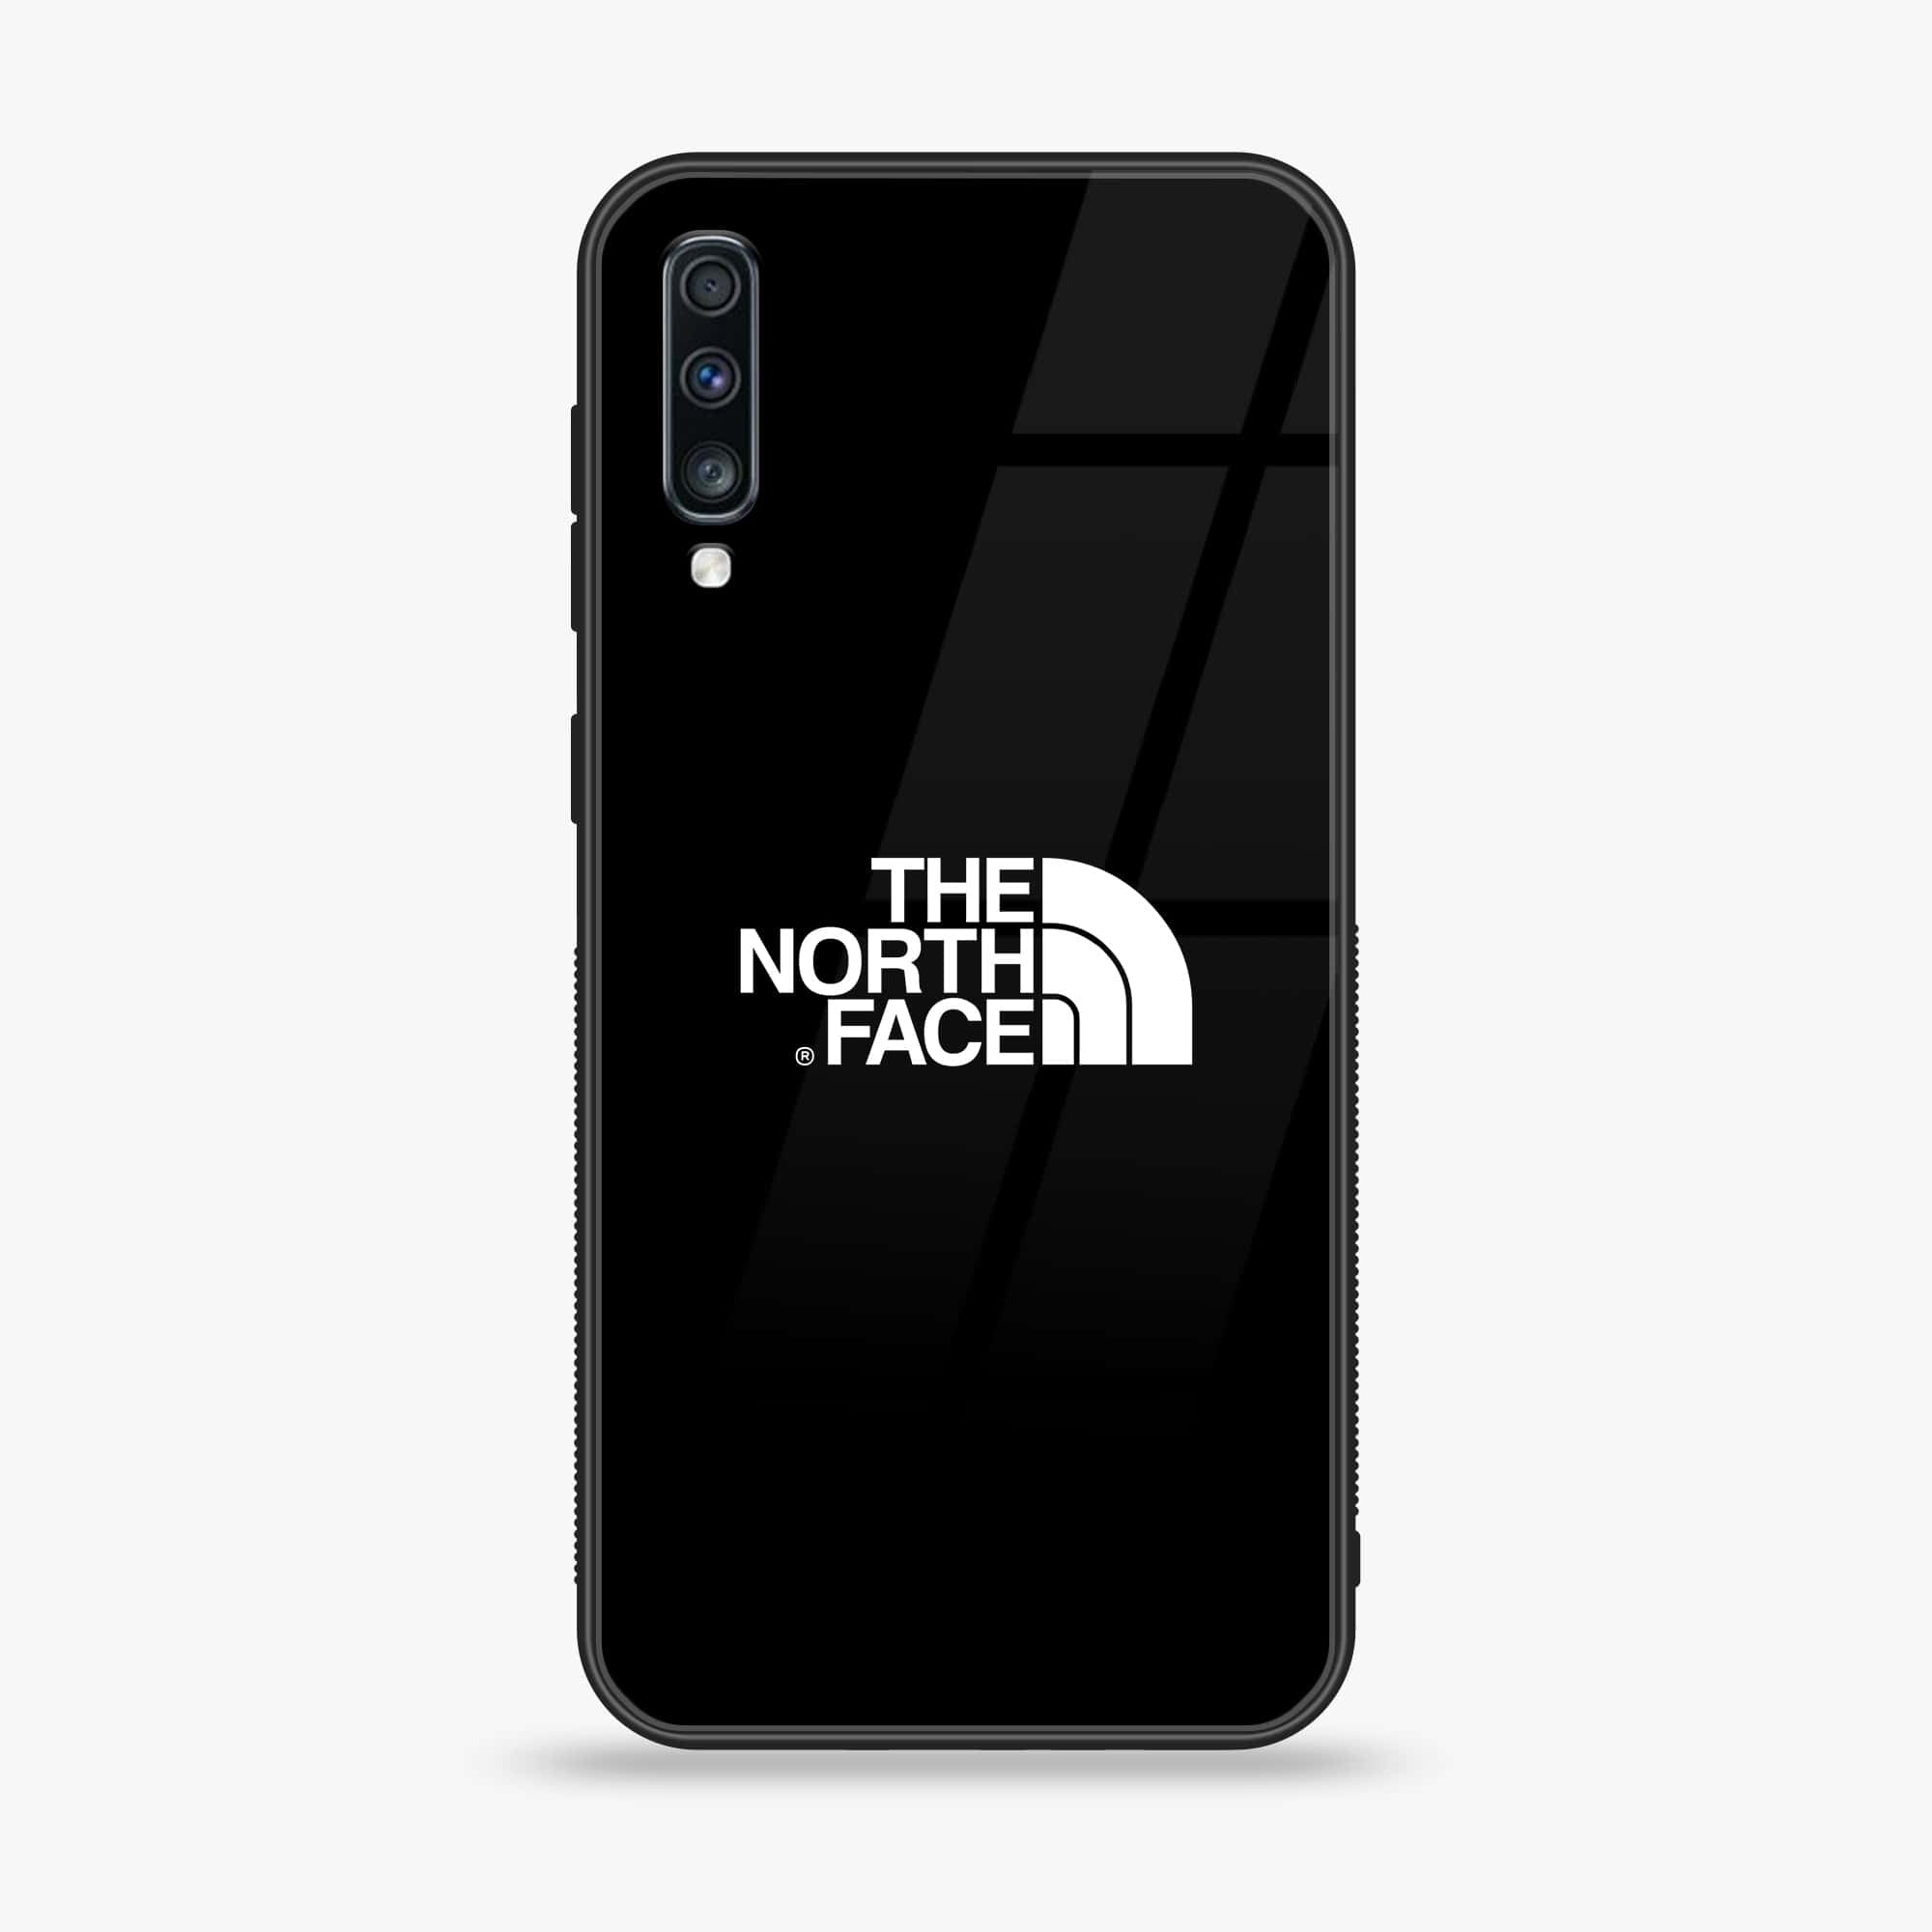 Samsung Galaxy A70S - The North Face Series - Premium Printed Glass soft Bumper shock Proof Case